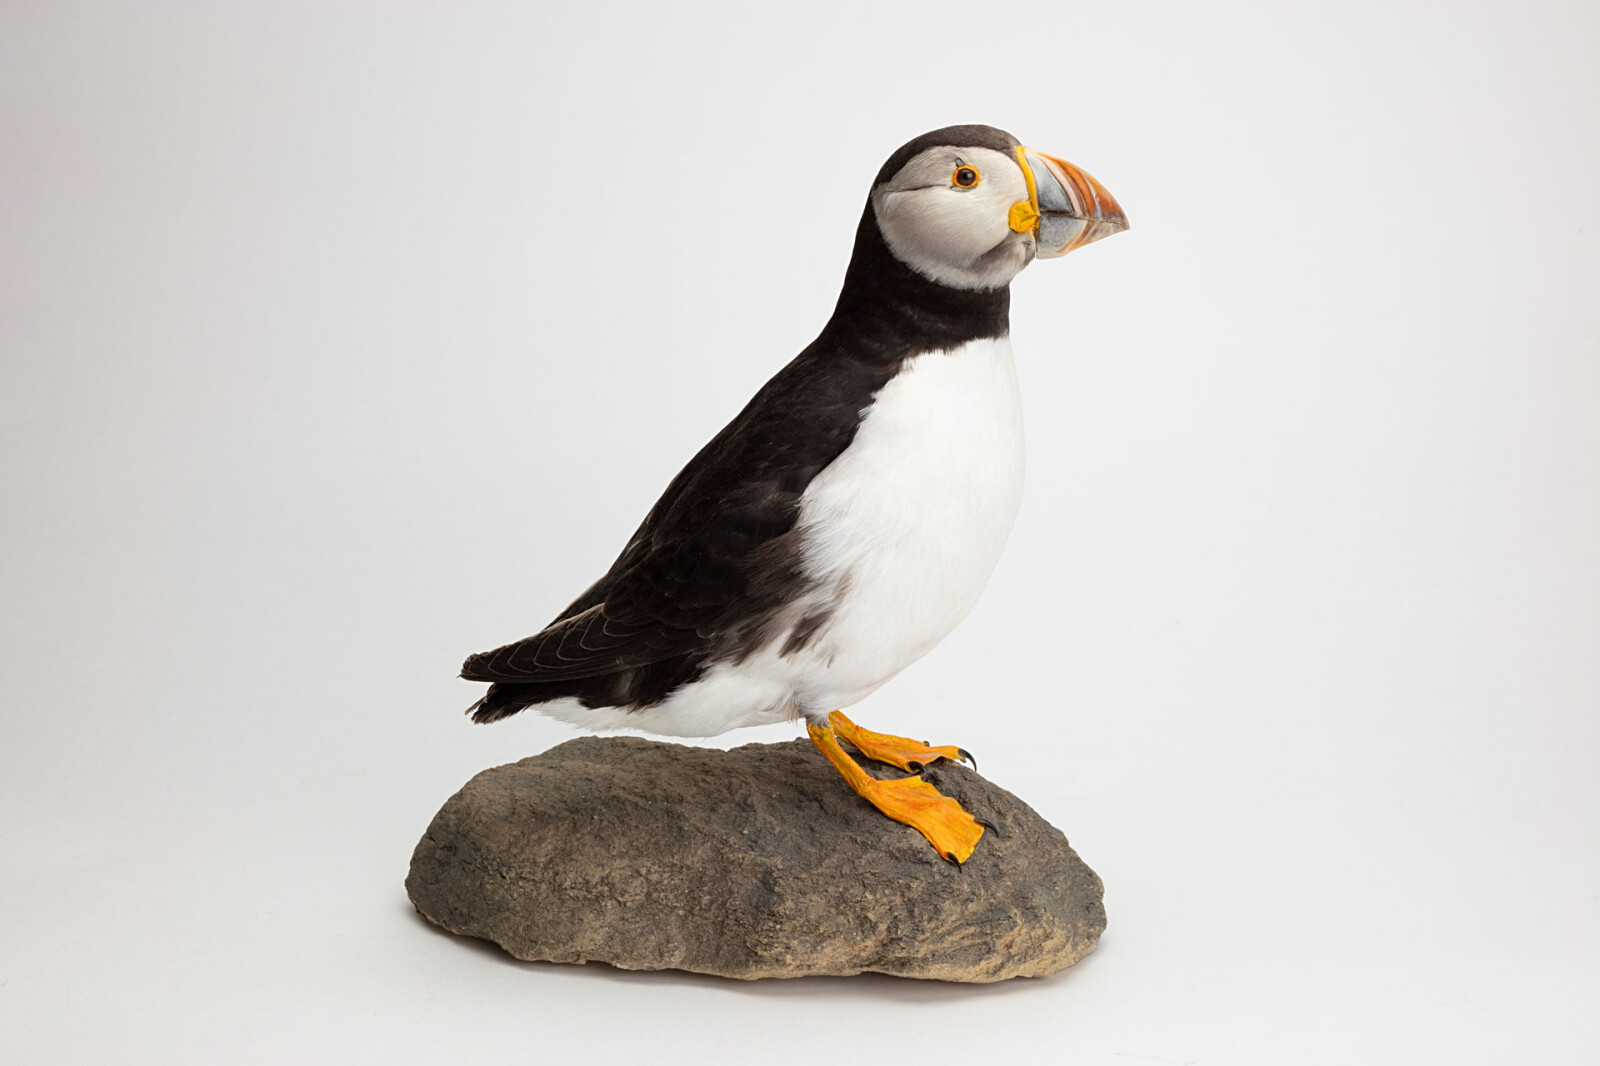 Taxidermy mount of a Puffin. A black and white seabird with orange webbed feet and a brightly coloured red, yellow and blue/grey beak